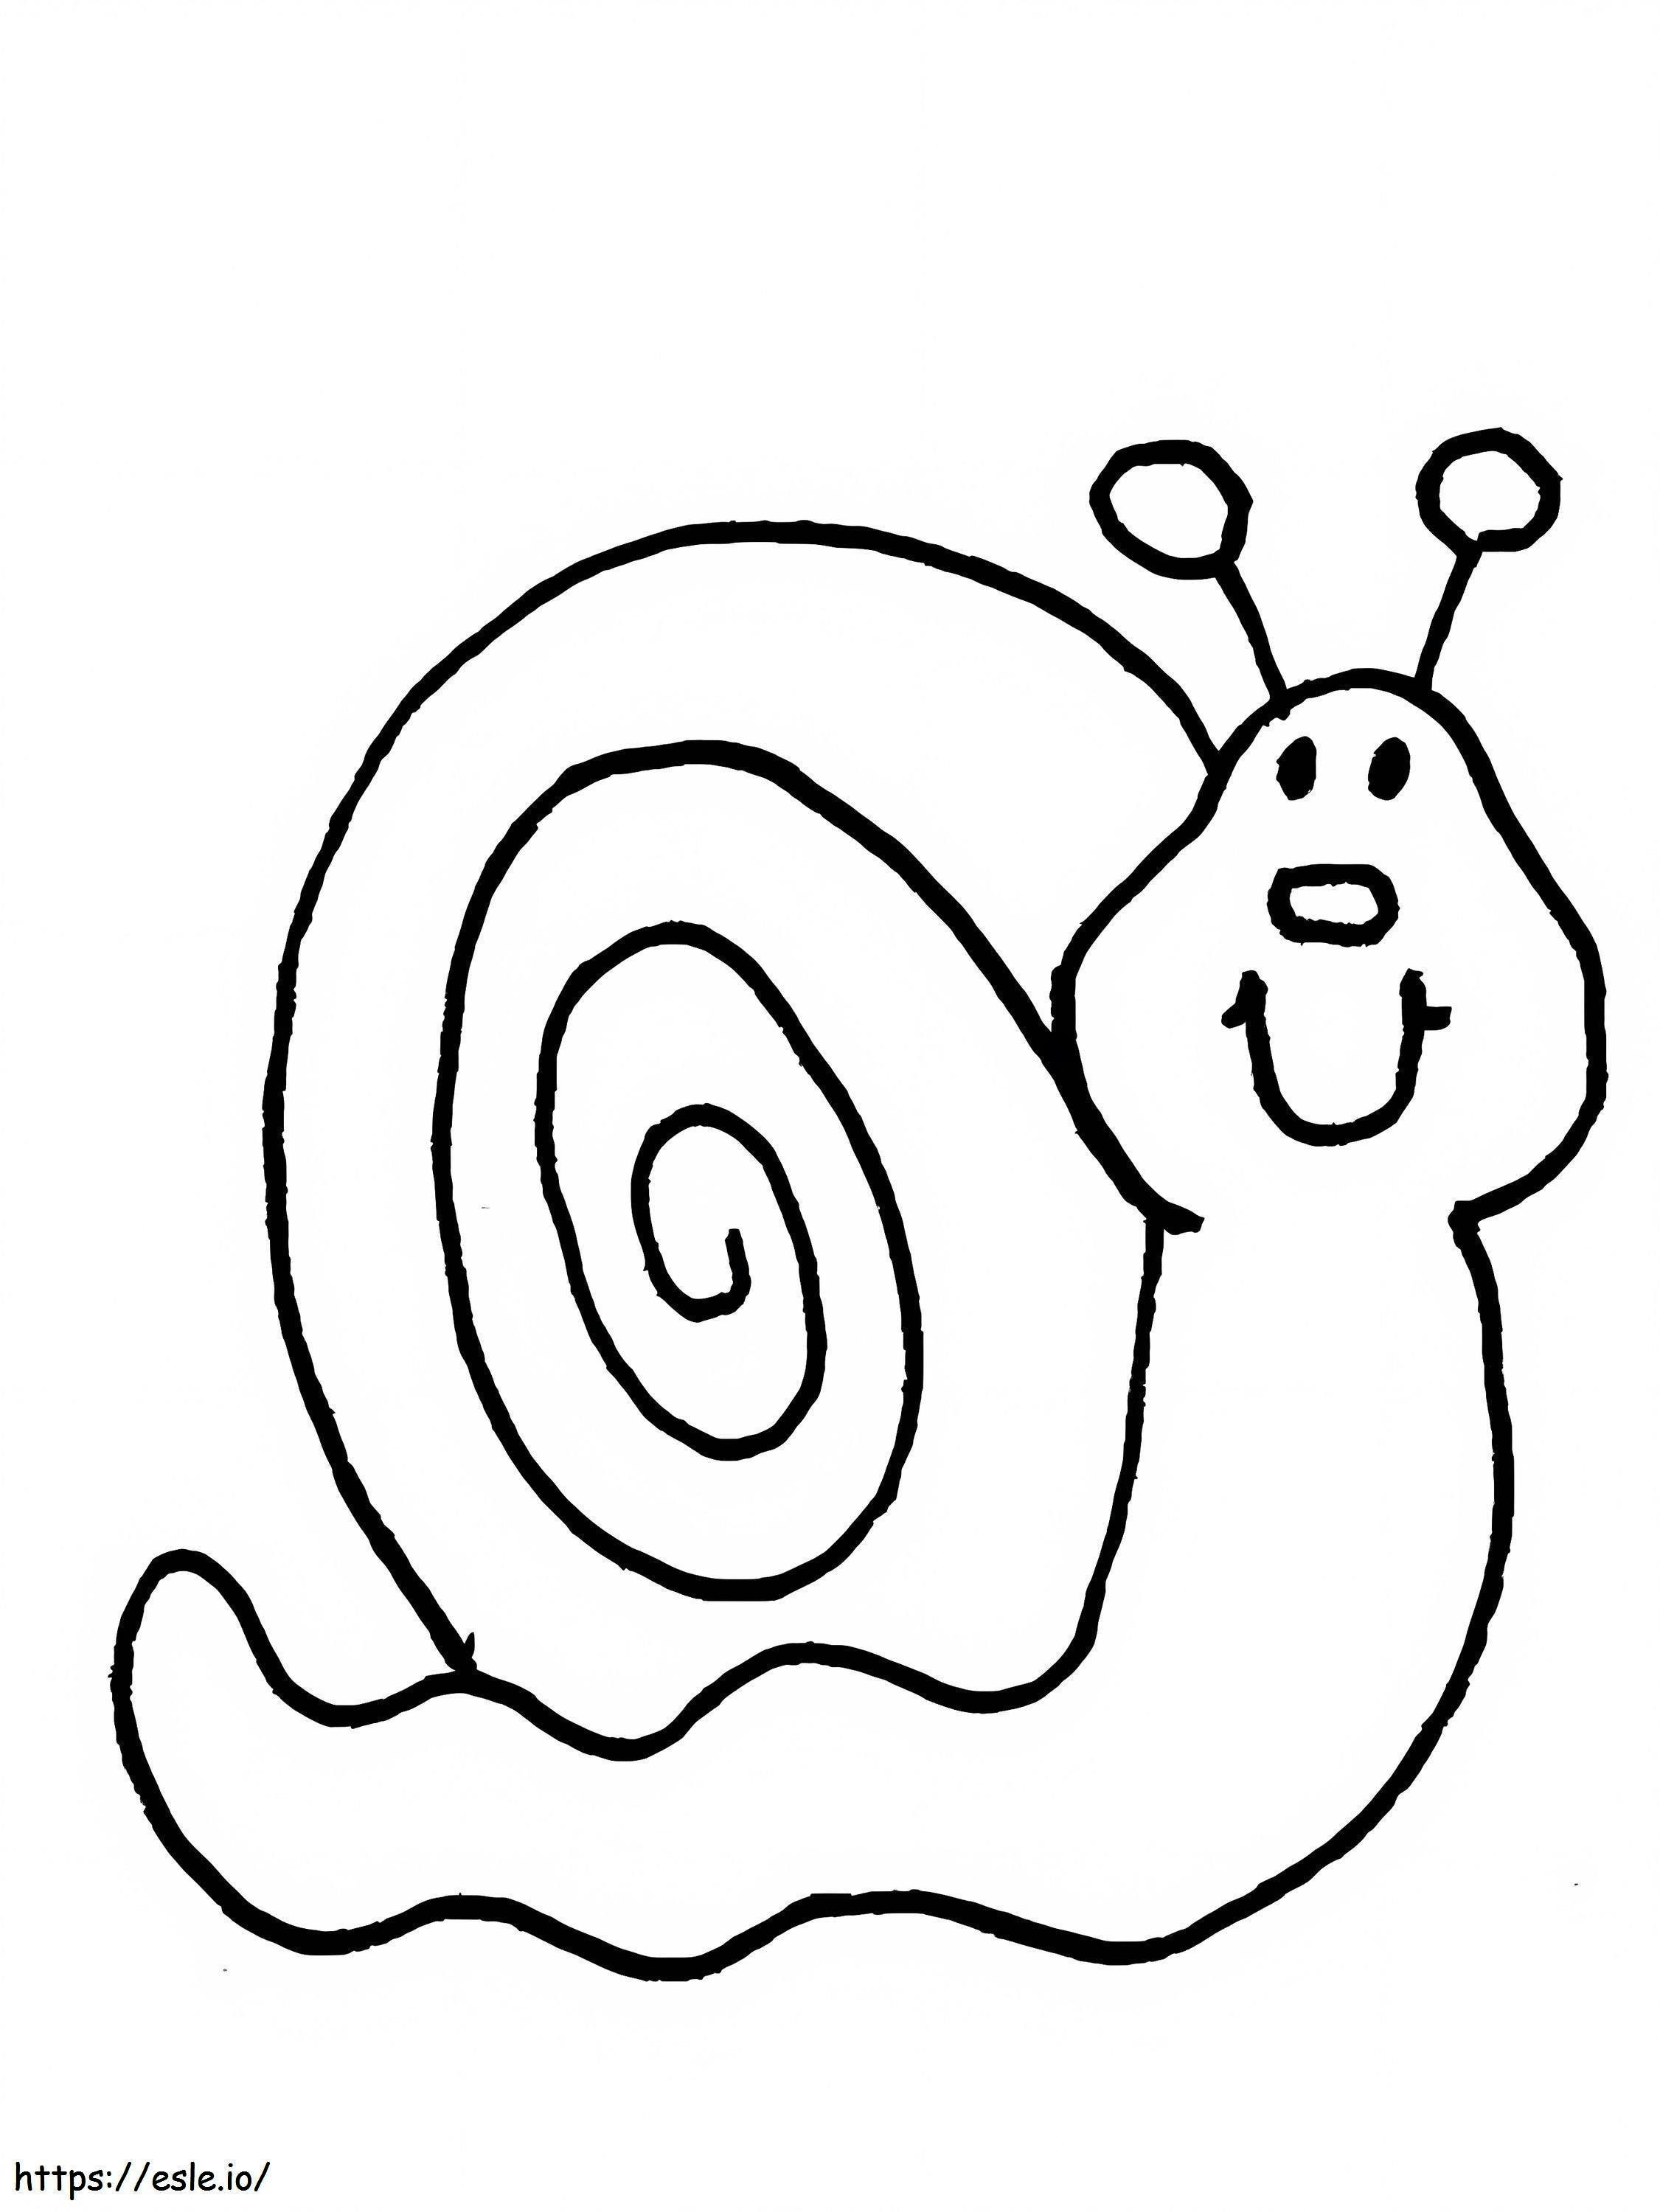 Simple Snail coloring page